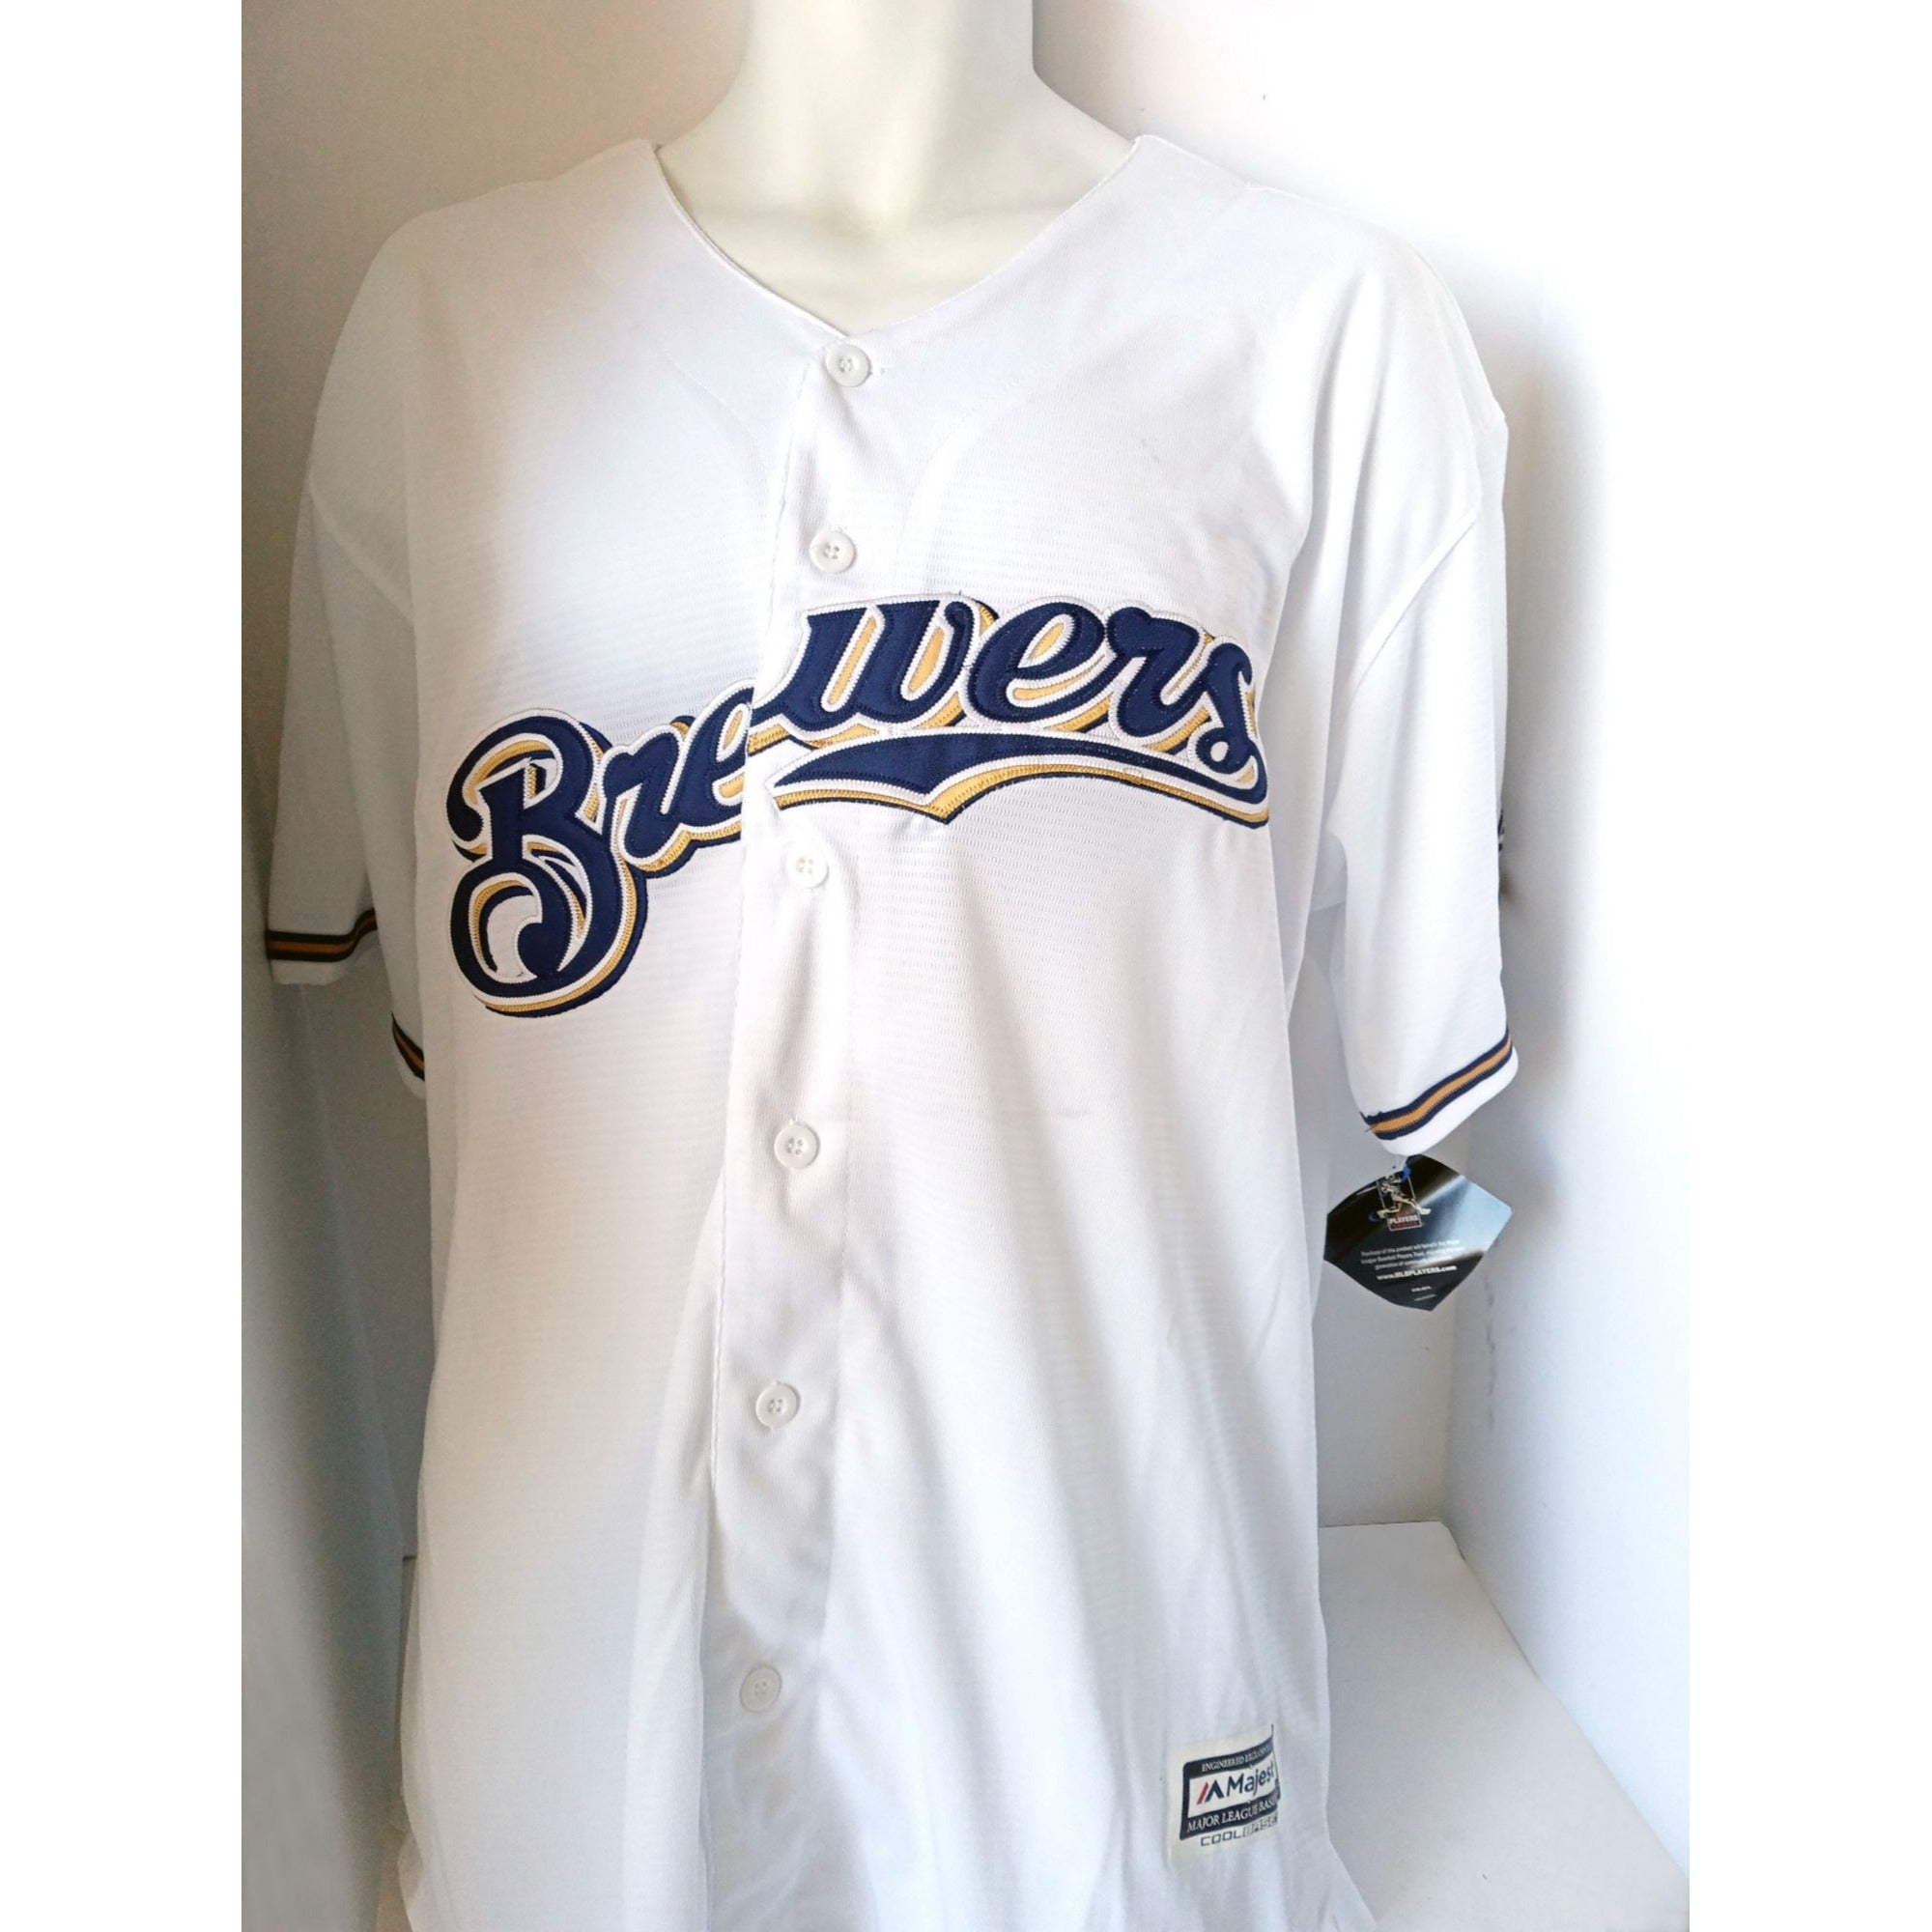 Christian Yelich Milwaukee Brewers size extra large jersey signed